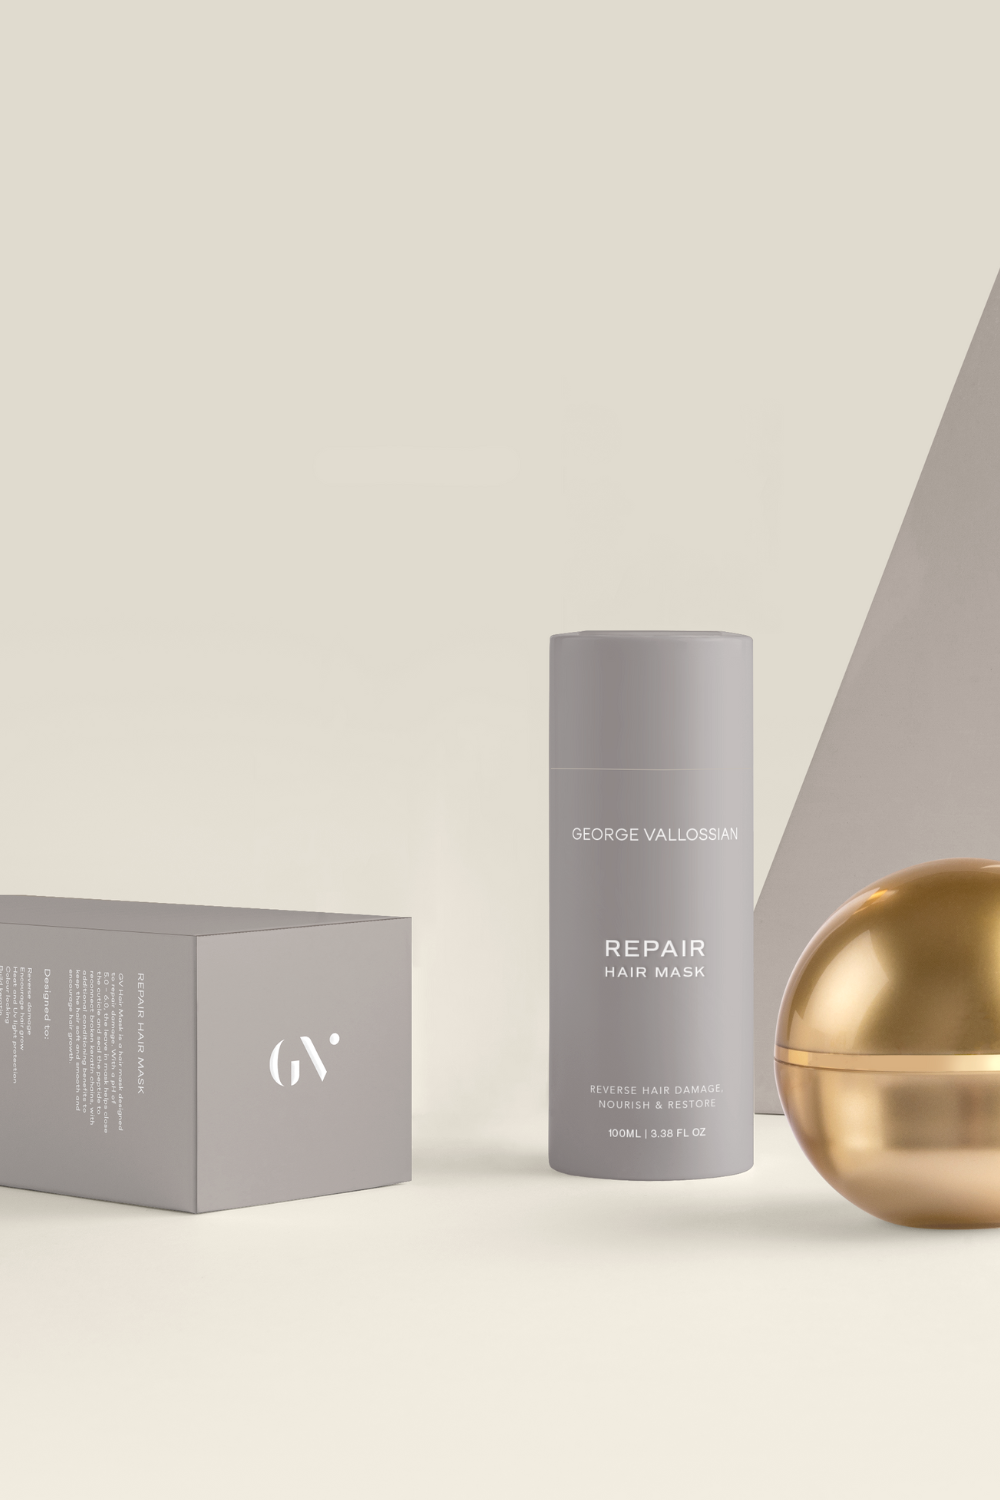 Branding and packaging design by Kyomi Design Agency for George Vallossian haircare product Repair Hair Mask.png